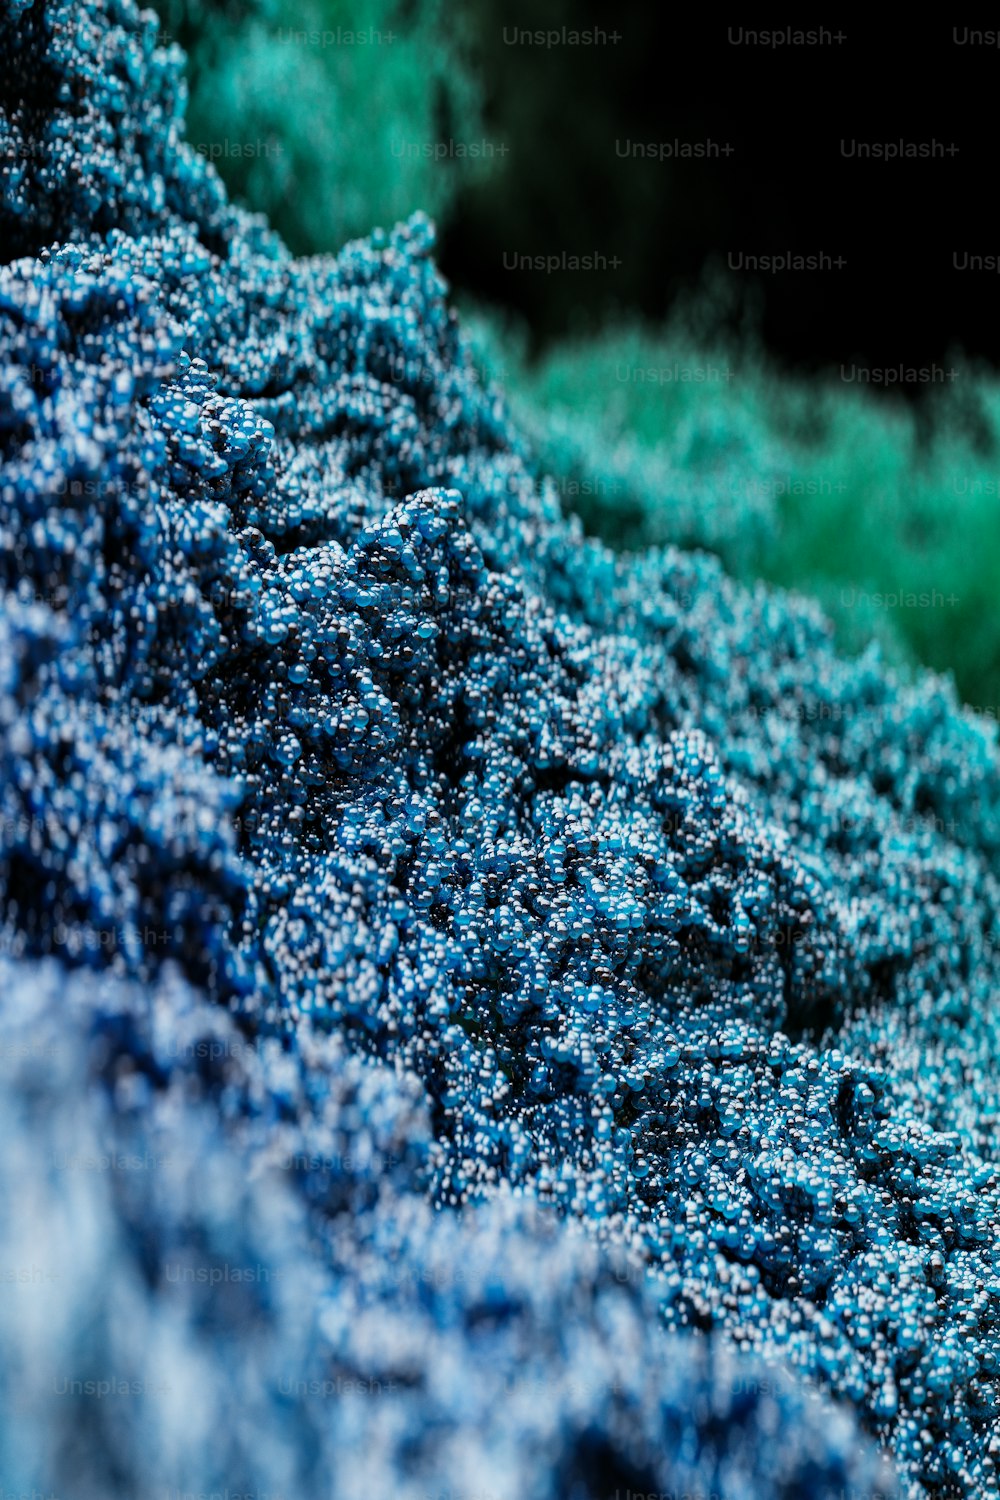 a close up of a blue and green substance